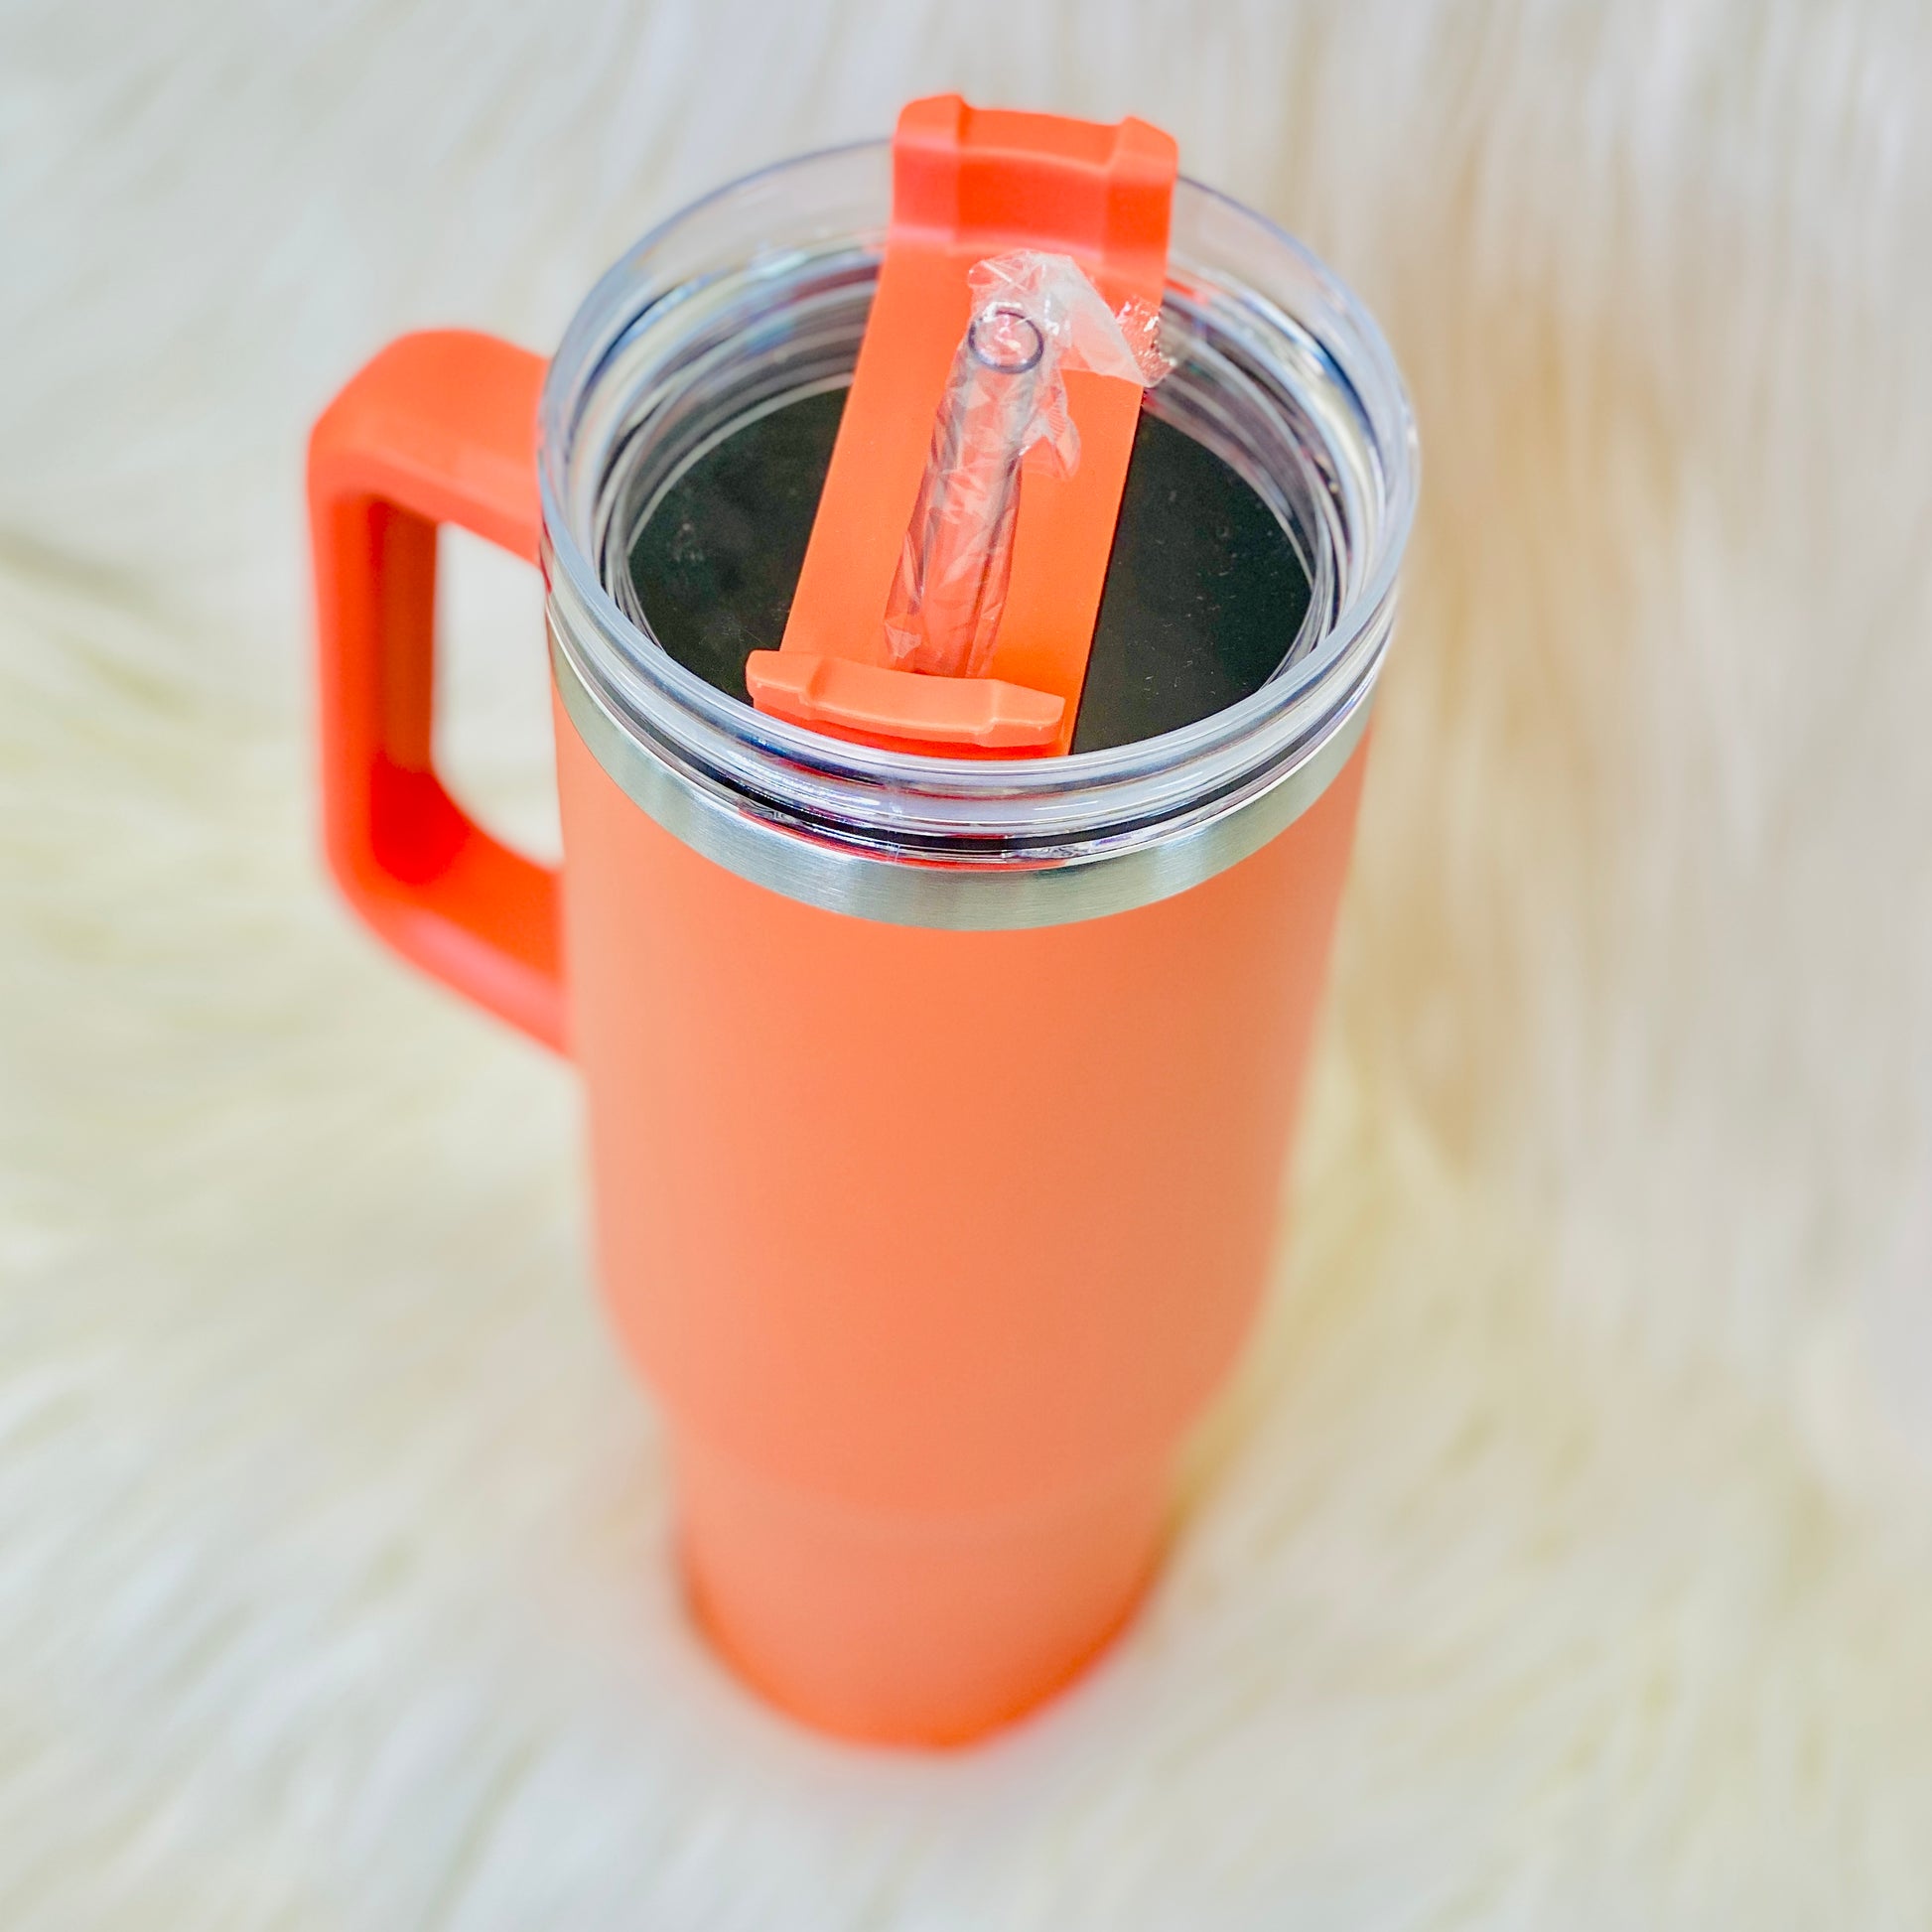 Stay hydrated in style with this 40oz. tumbler! This stainless steel tumbler is perfect for busy adults who are on the go and want to stay refreshed throughout the day. 